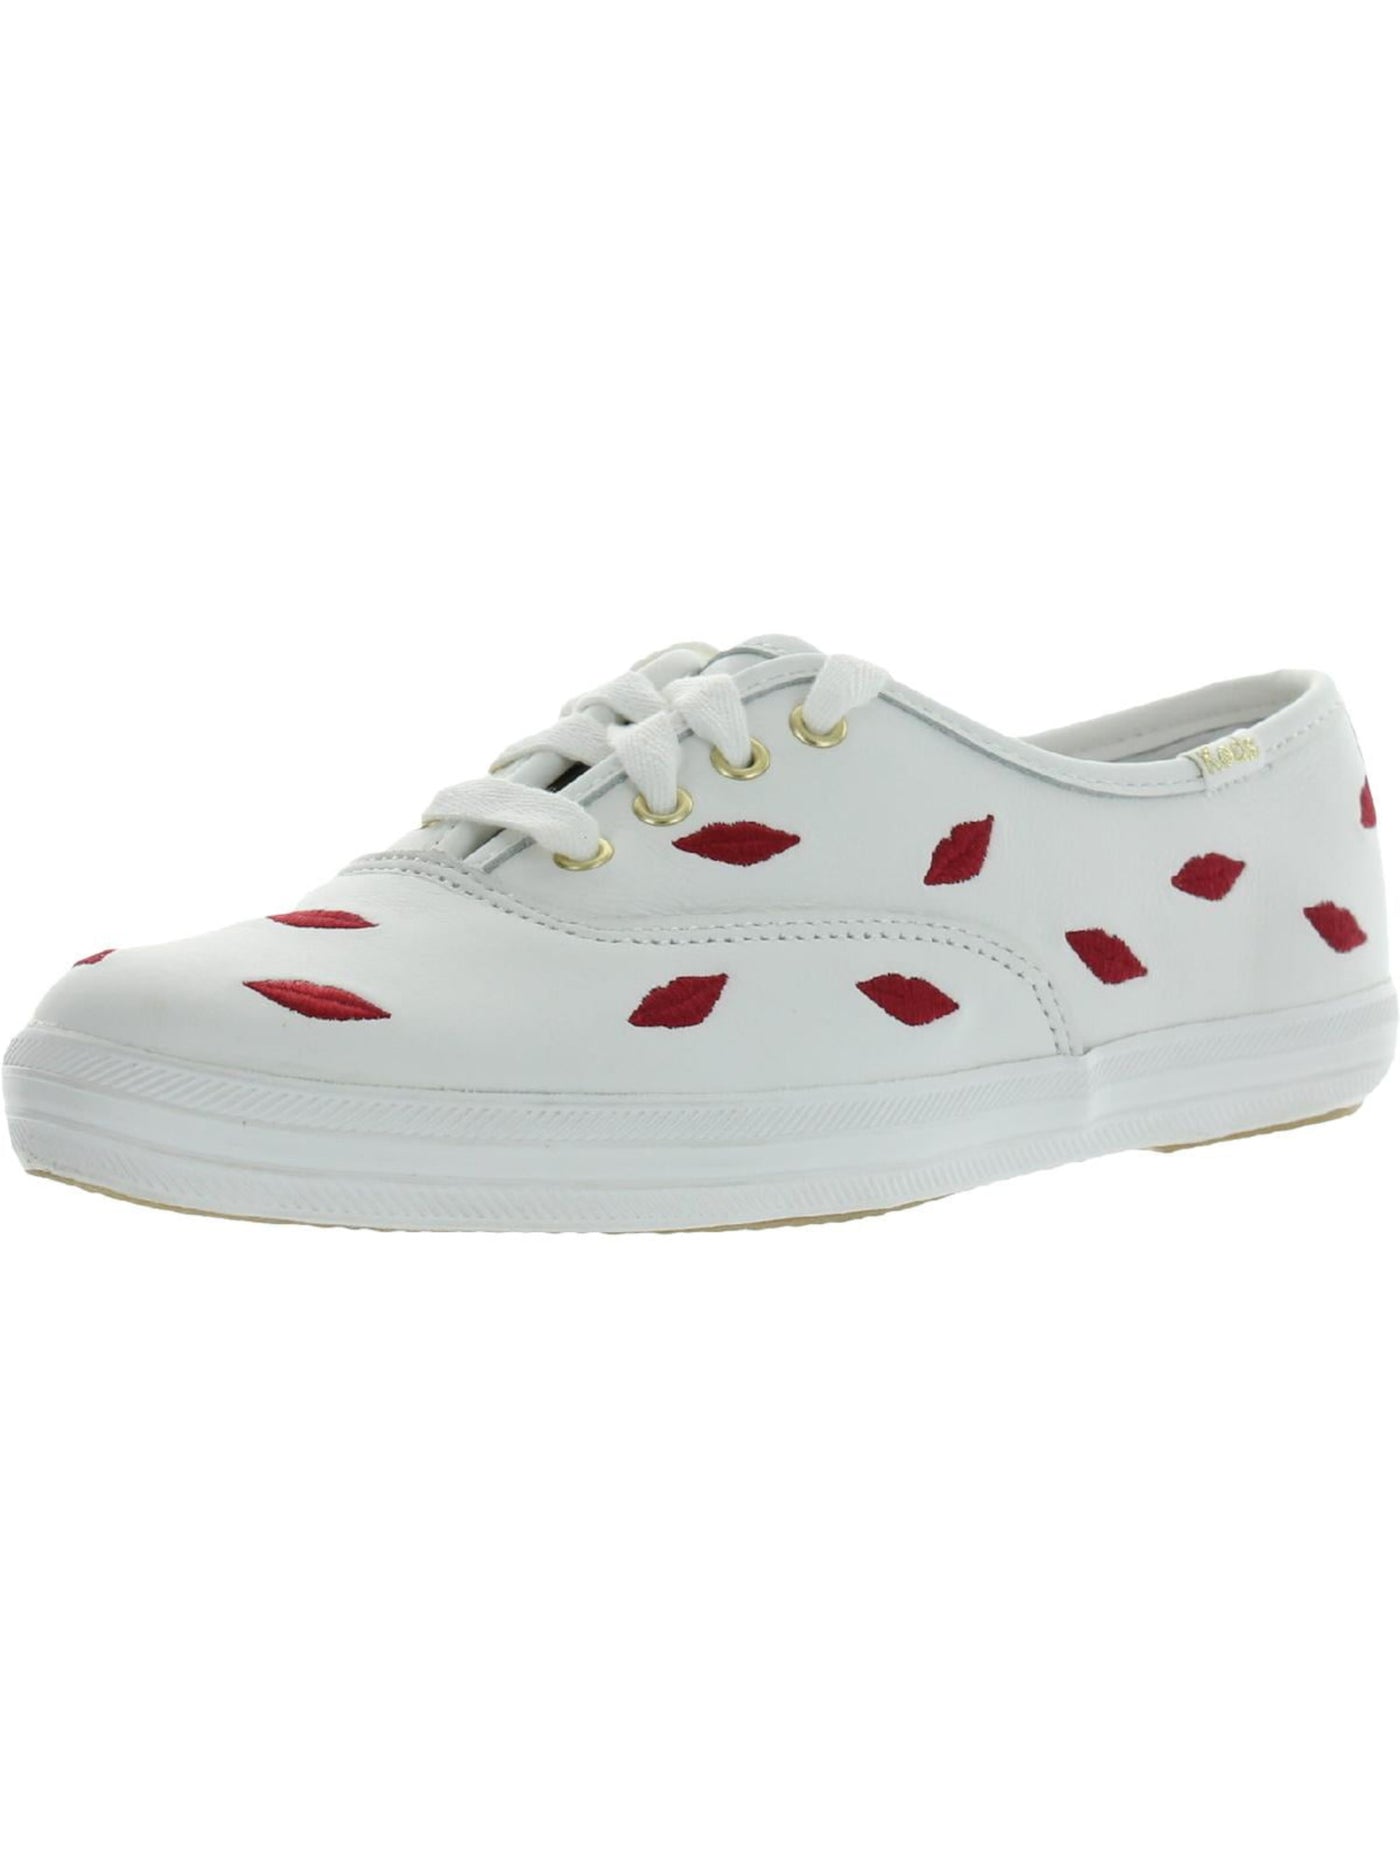 KEDS FOR KATE SPADE NEW YORK Womens White Printed Hardware At Heel Padded Embroidered Champion Ks Round Toe Lace-Up Leather Sneakers Shoes 8